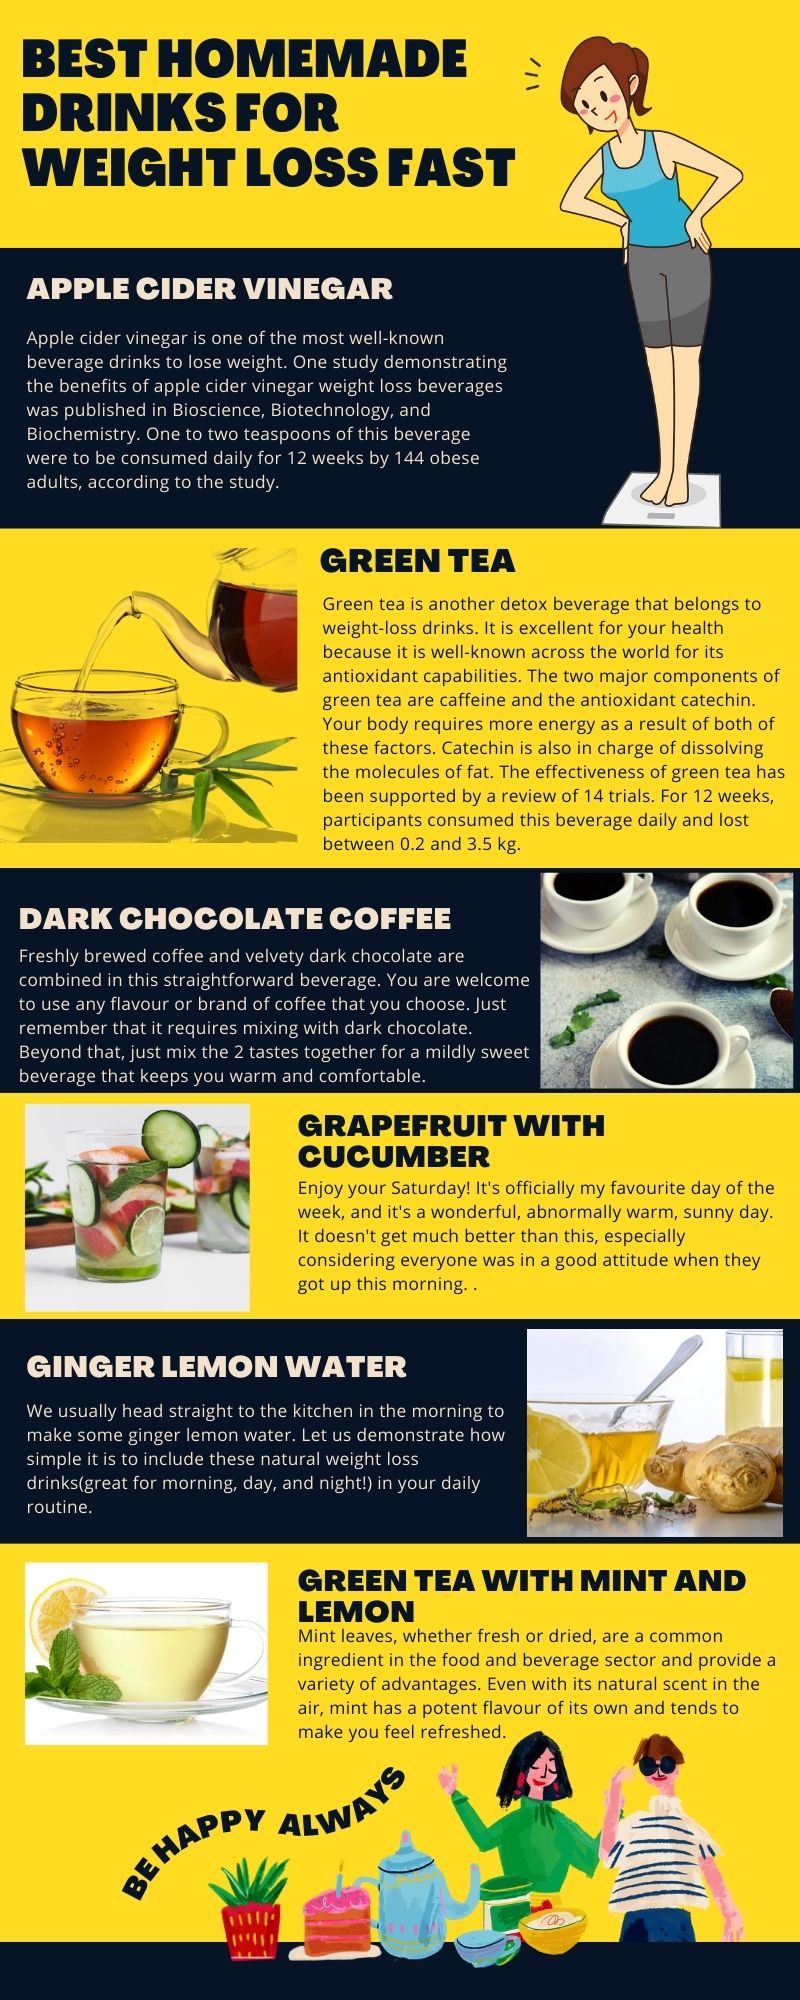 Drinks for Weight Loss Fast infographic